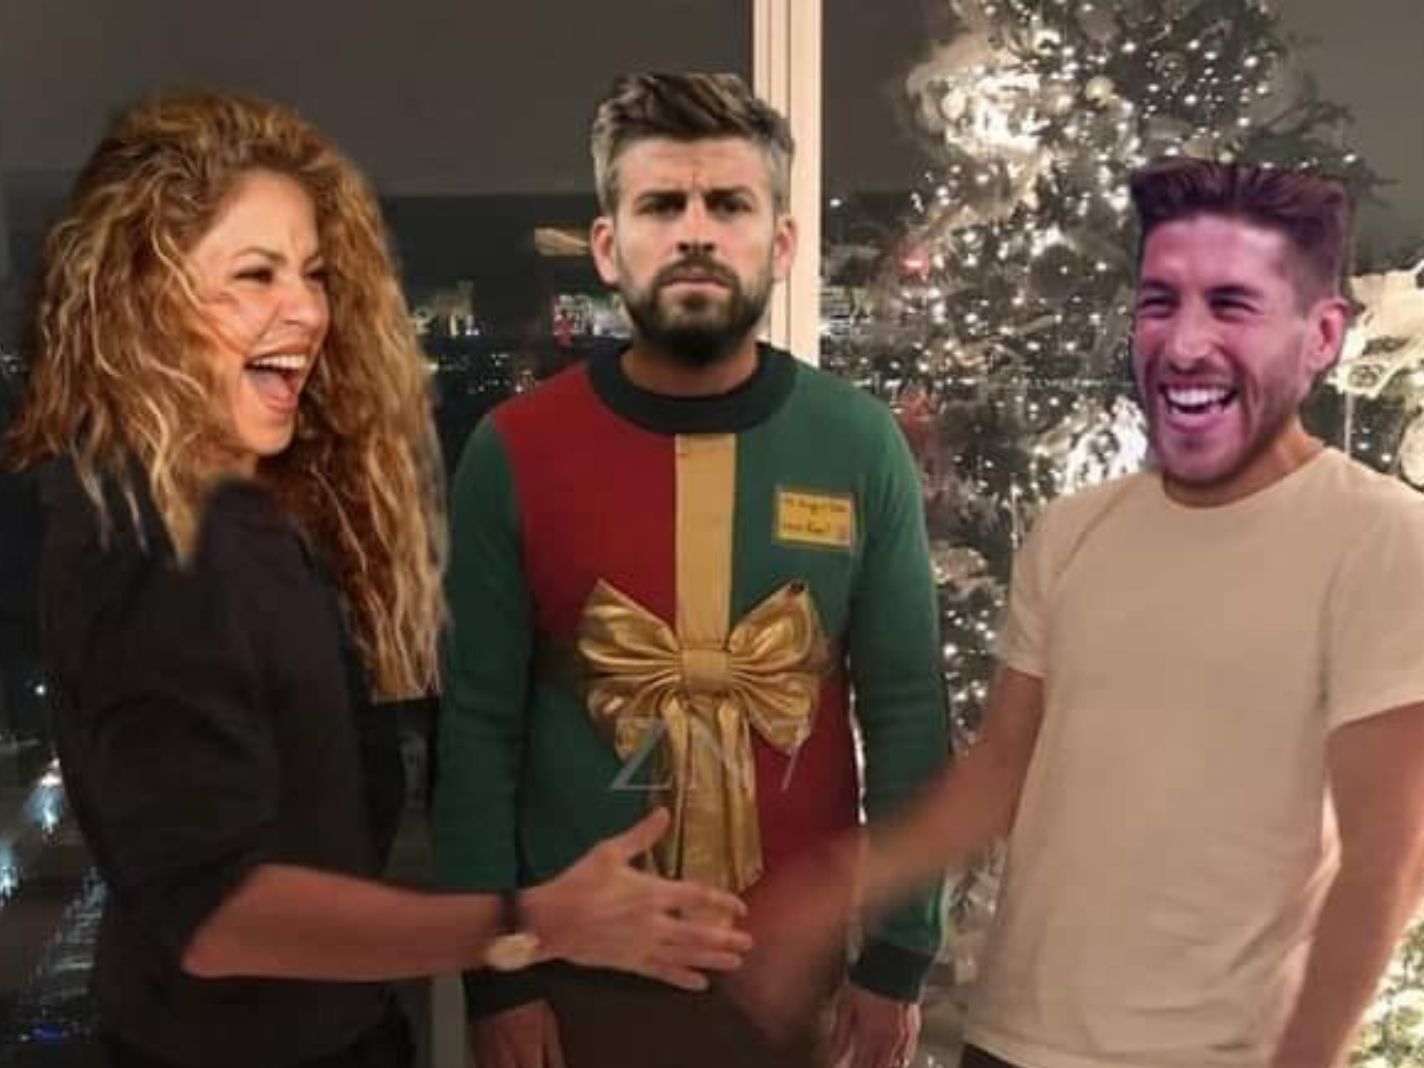 Gerard Pique Diss Track Earns Shakira the Latin Grammys and Look Who’s There To Present It